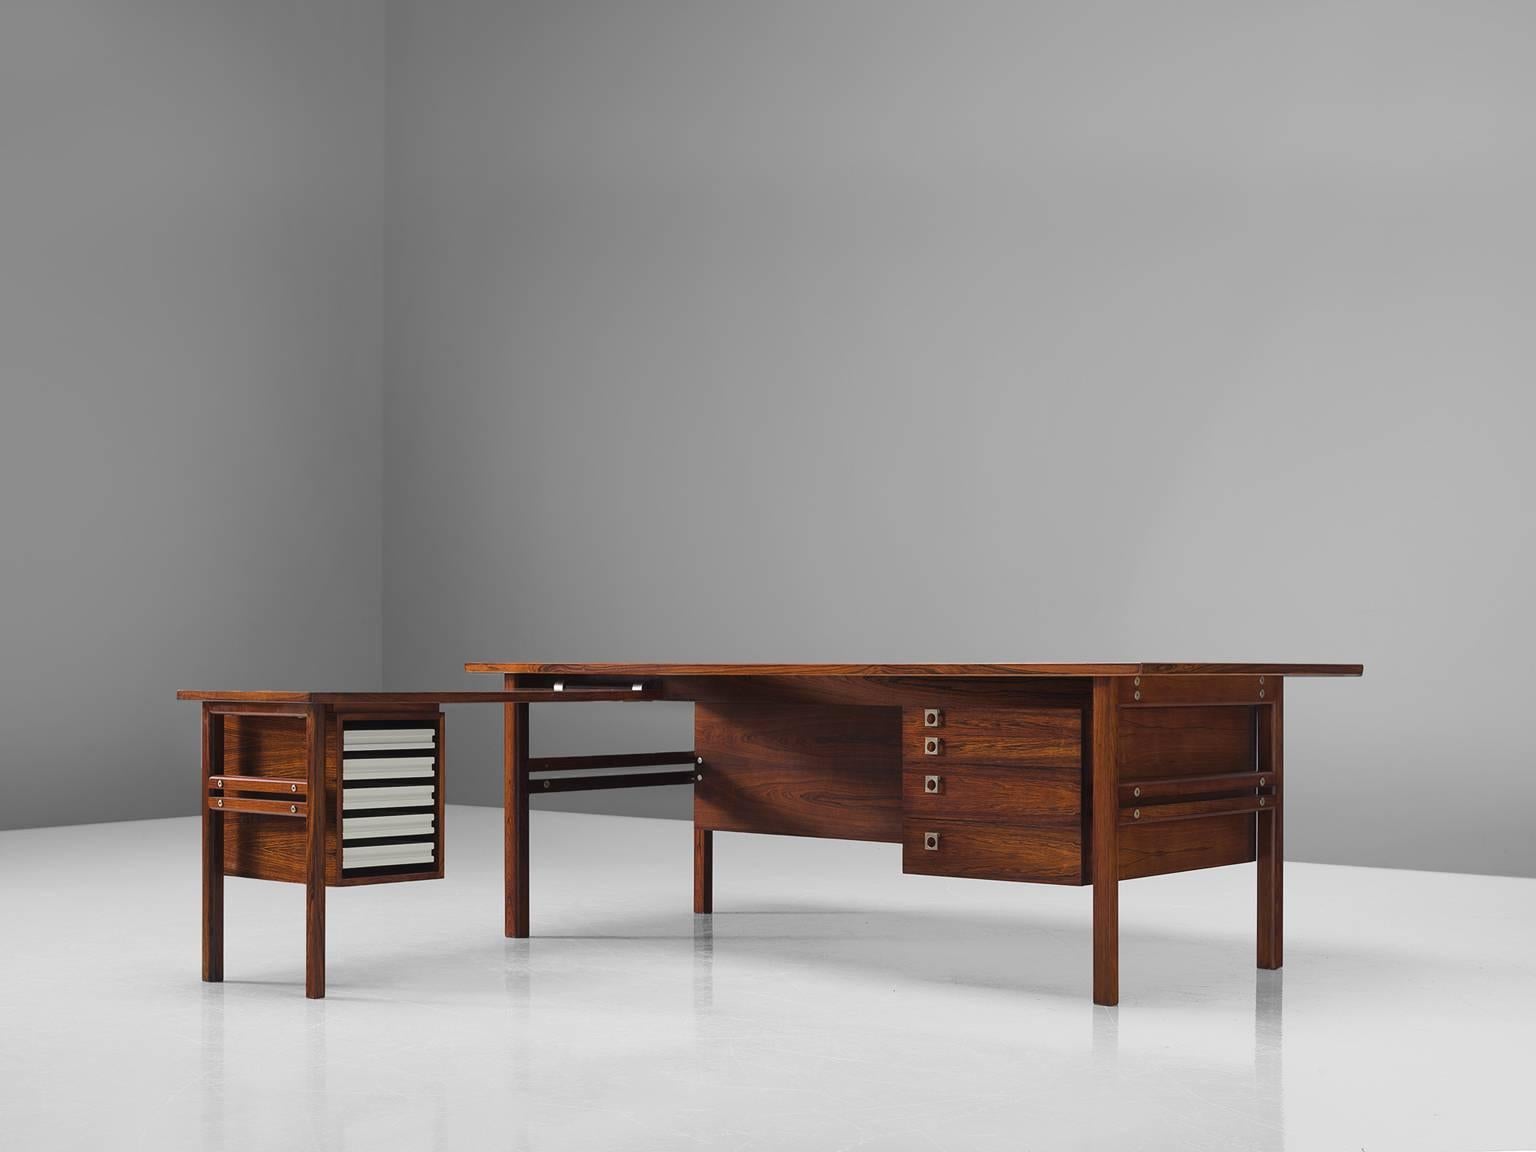 Arne Vodder for Sibast, corner desk 277 in rosewood and metal, Denmark, 1950s

This rosewood executive desk by the Dane Arne Vodder is part of the midcentury design collection. This luxurious piece was designed by one of the most profilic